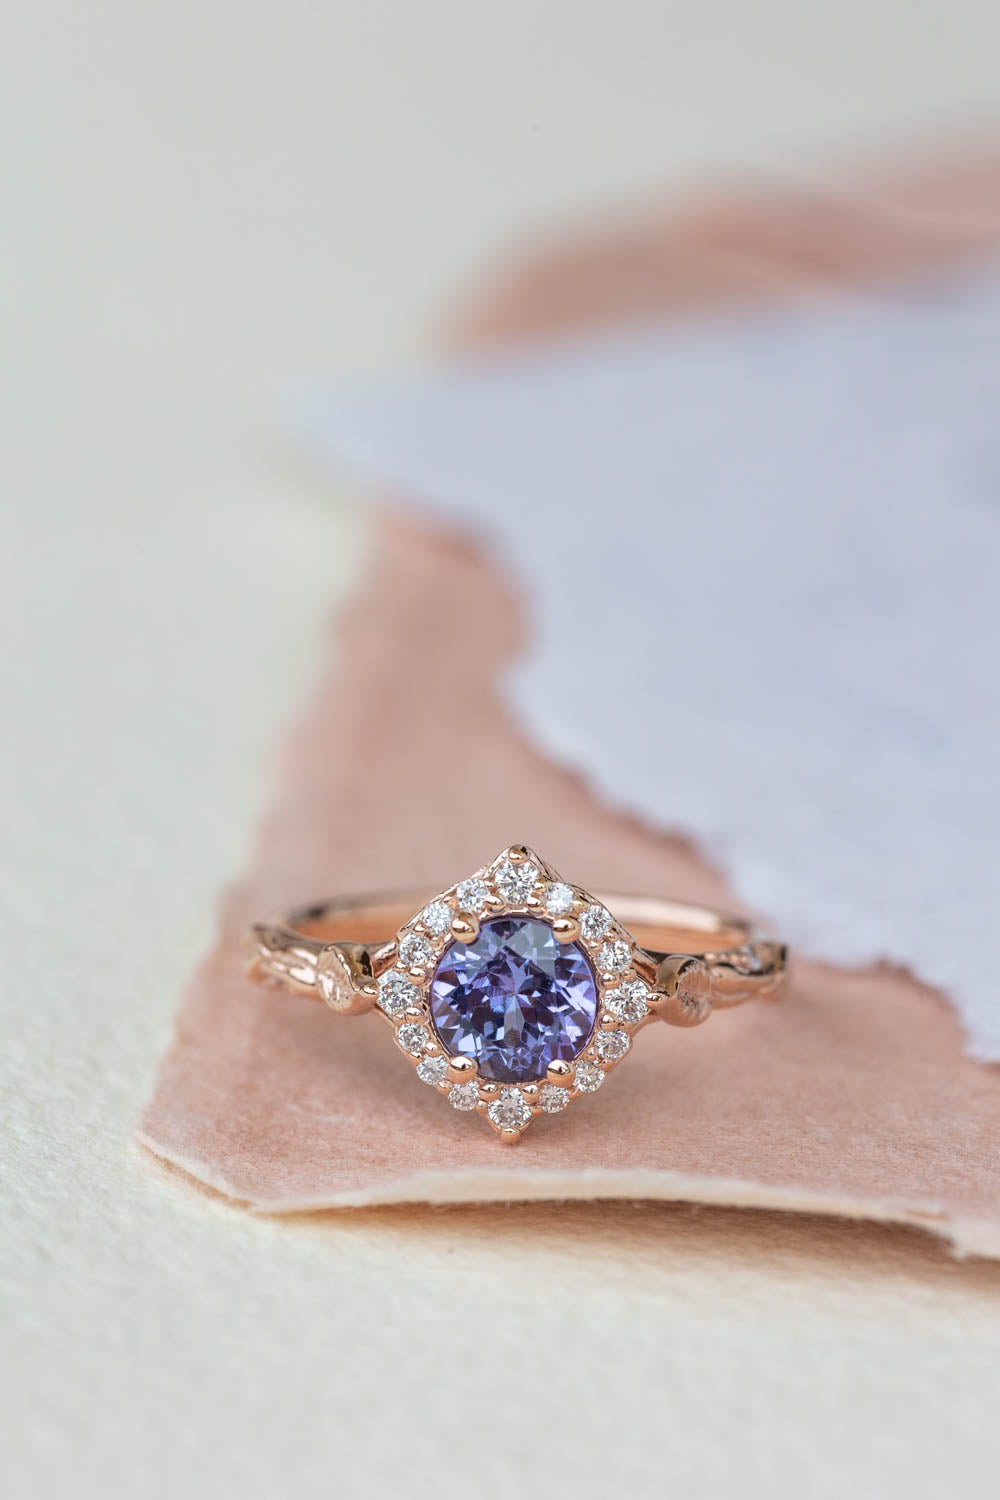 Lavender tanzanite engagement ring with diamond halo, rose gold leaves ring with diamonds / Florentina - Eden Garden Jewelry™